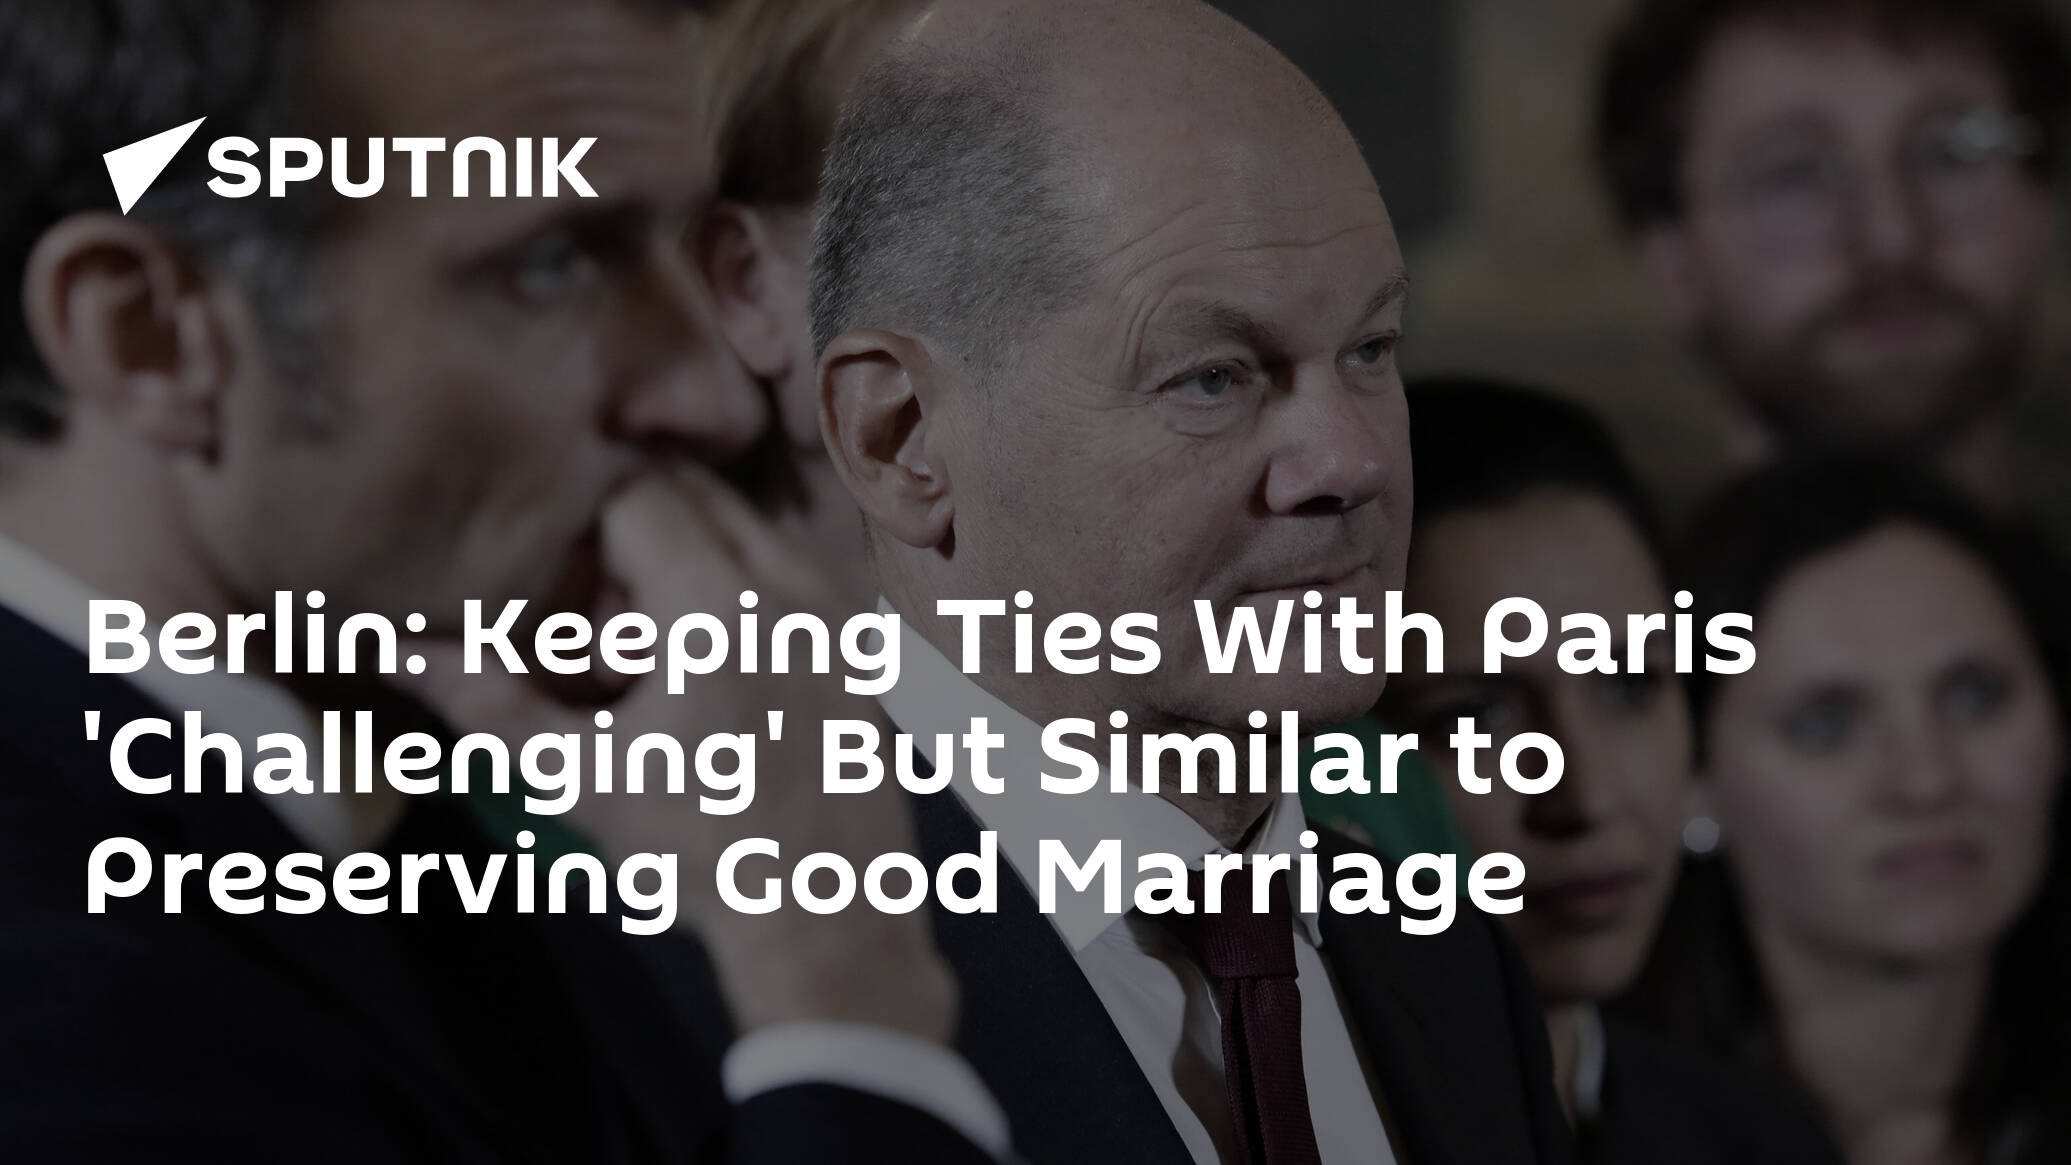 Berlin: Keeping Ties With Paris 'Challenging' But Similar to Preserving Good Marriage